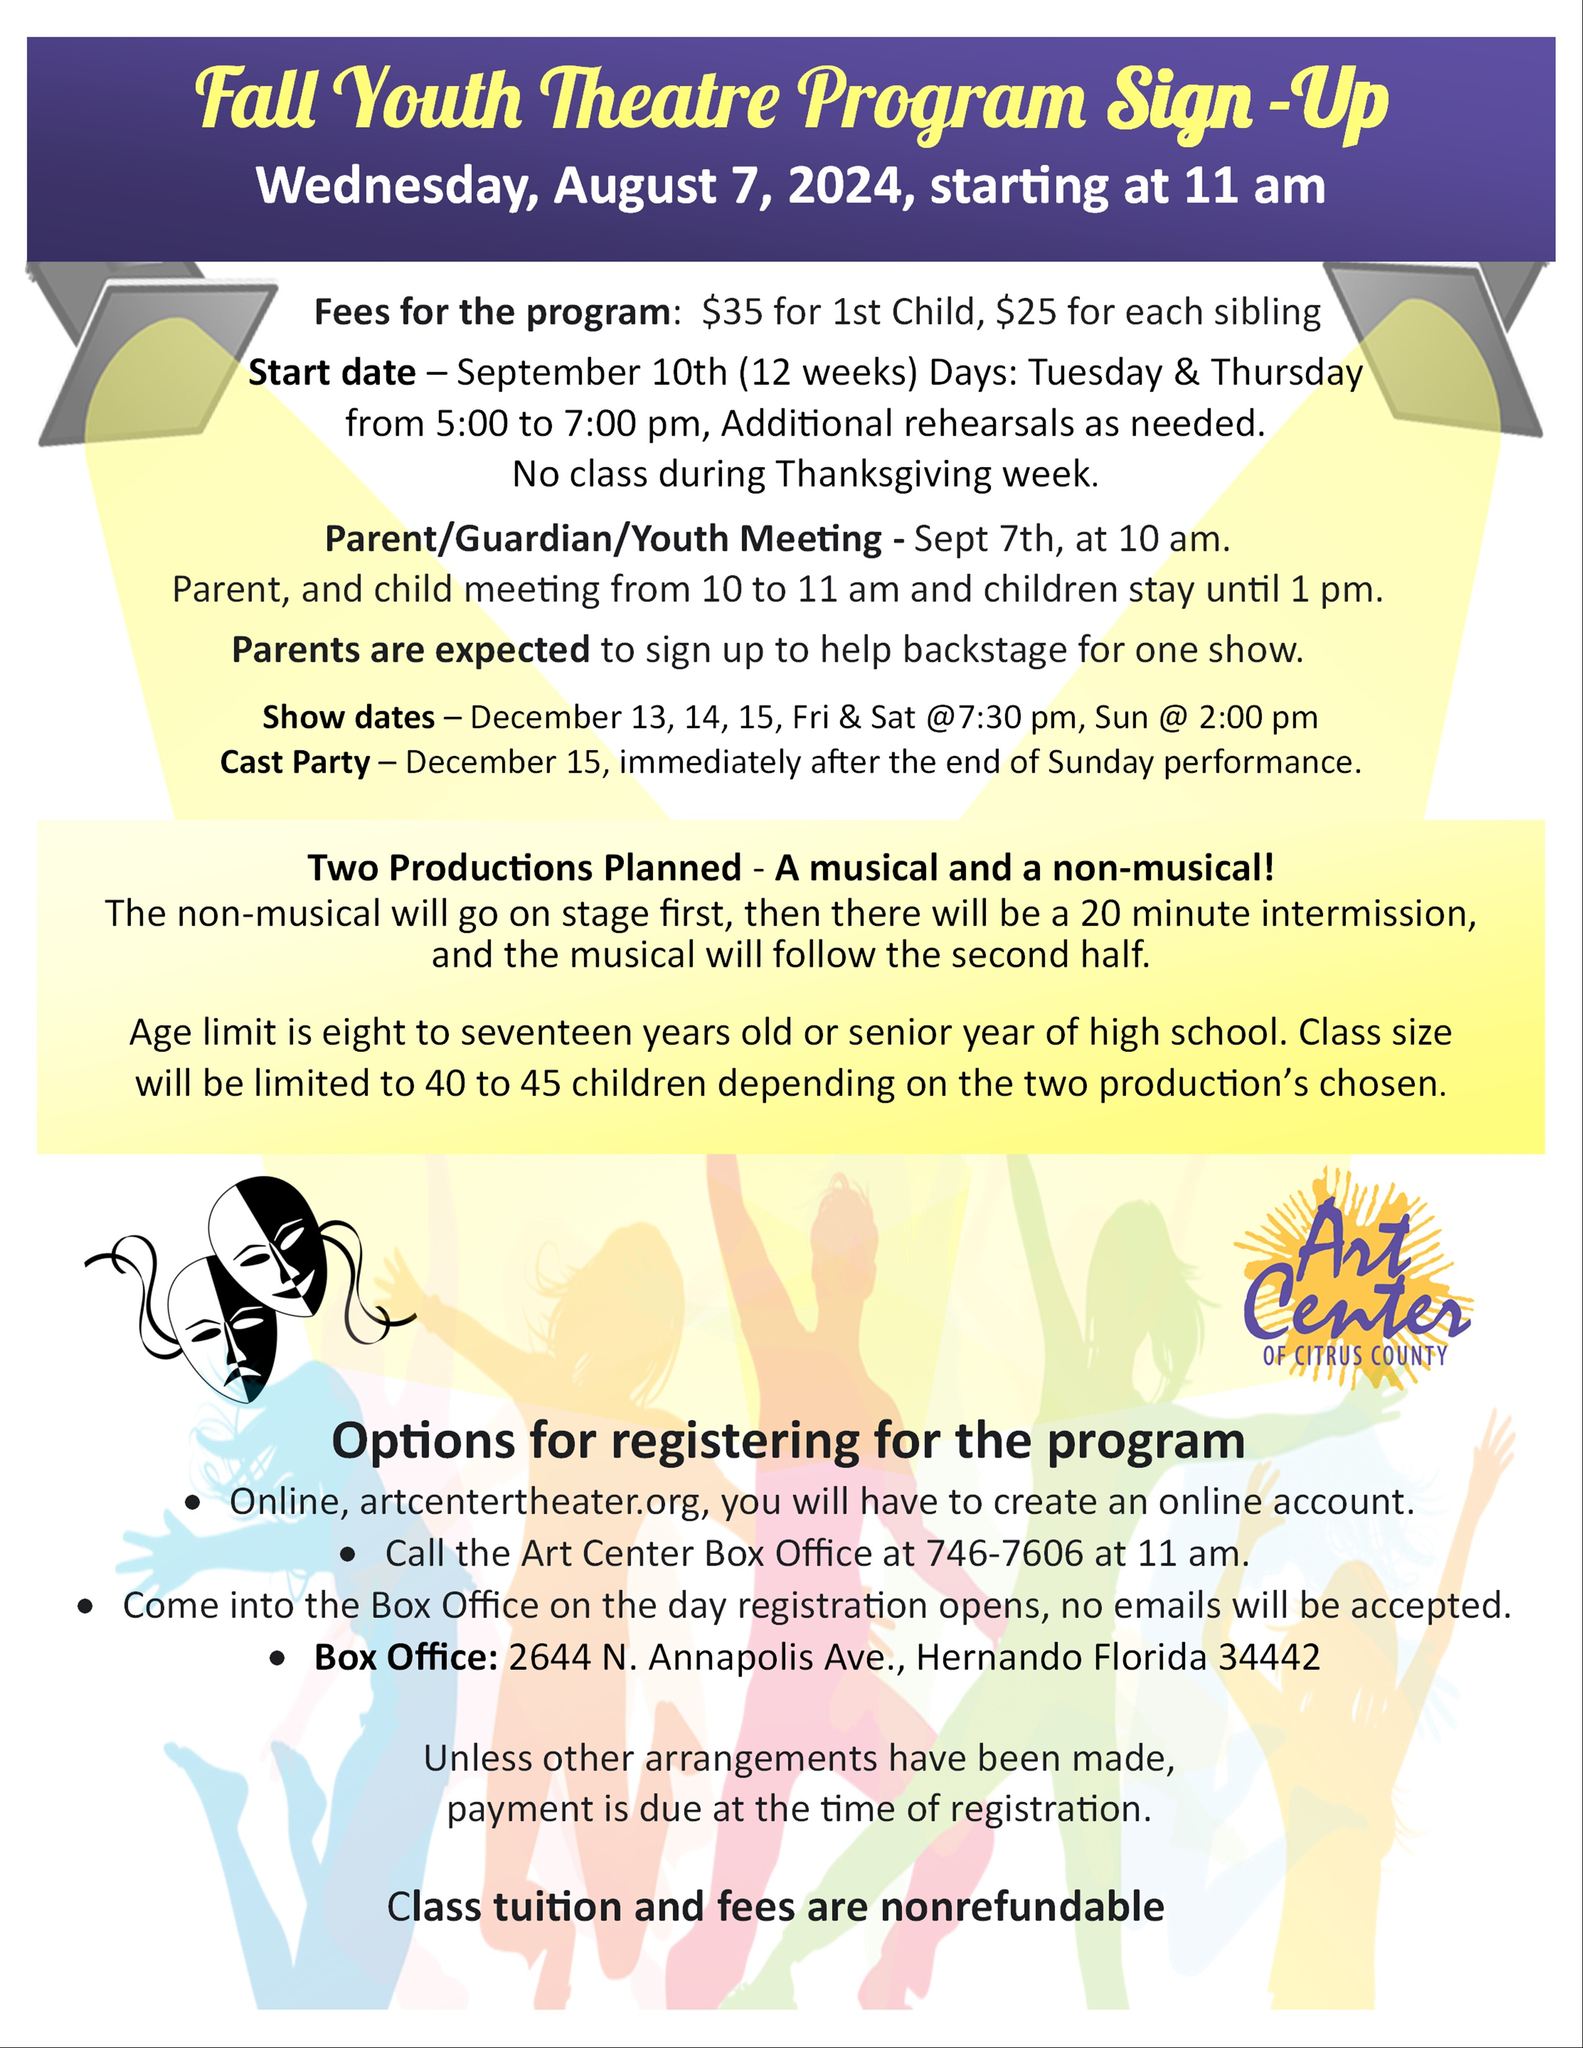 Join the Youth Theatre Fall 2024 Program: Details and Registration